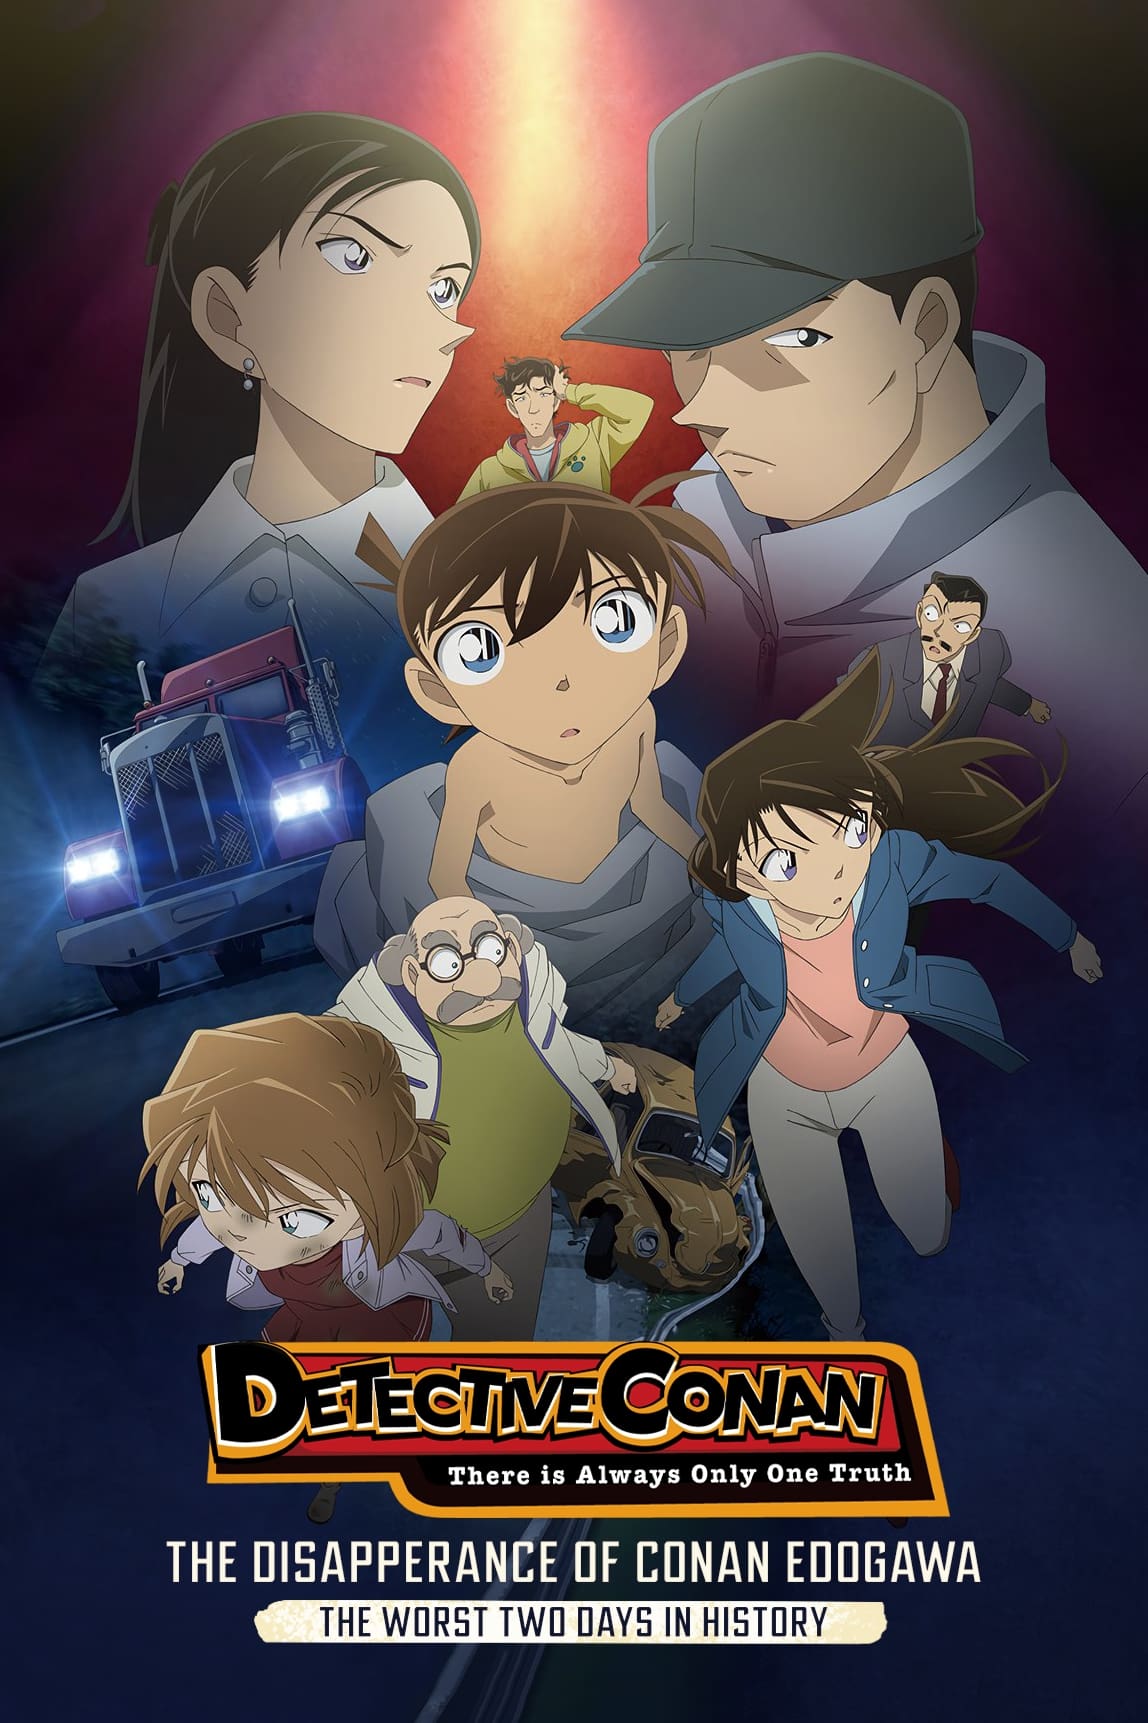 The Disappearance of Conan Edogawa: The Worst Two Days in History (2014)